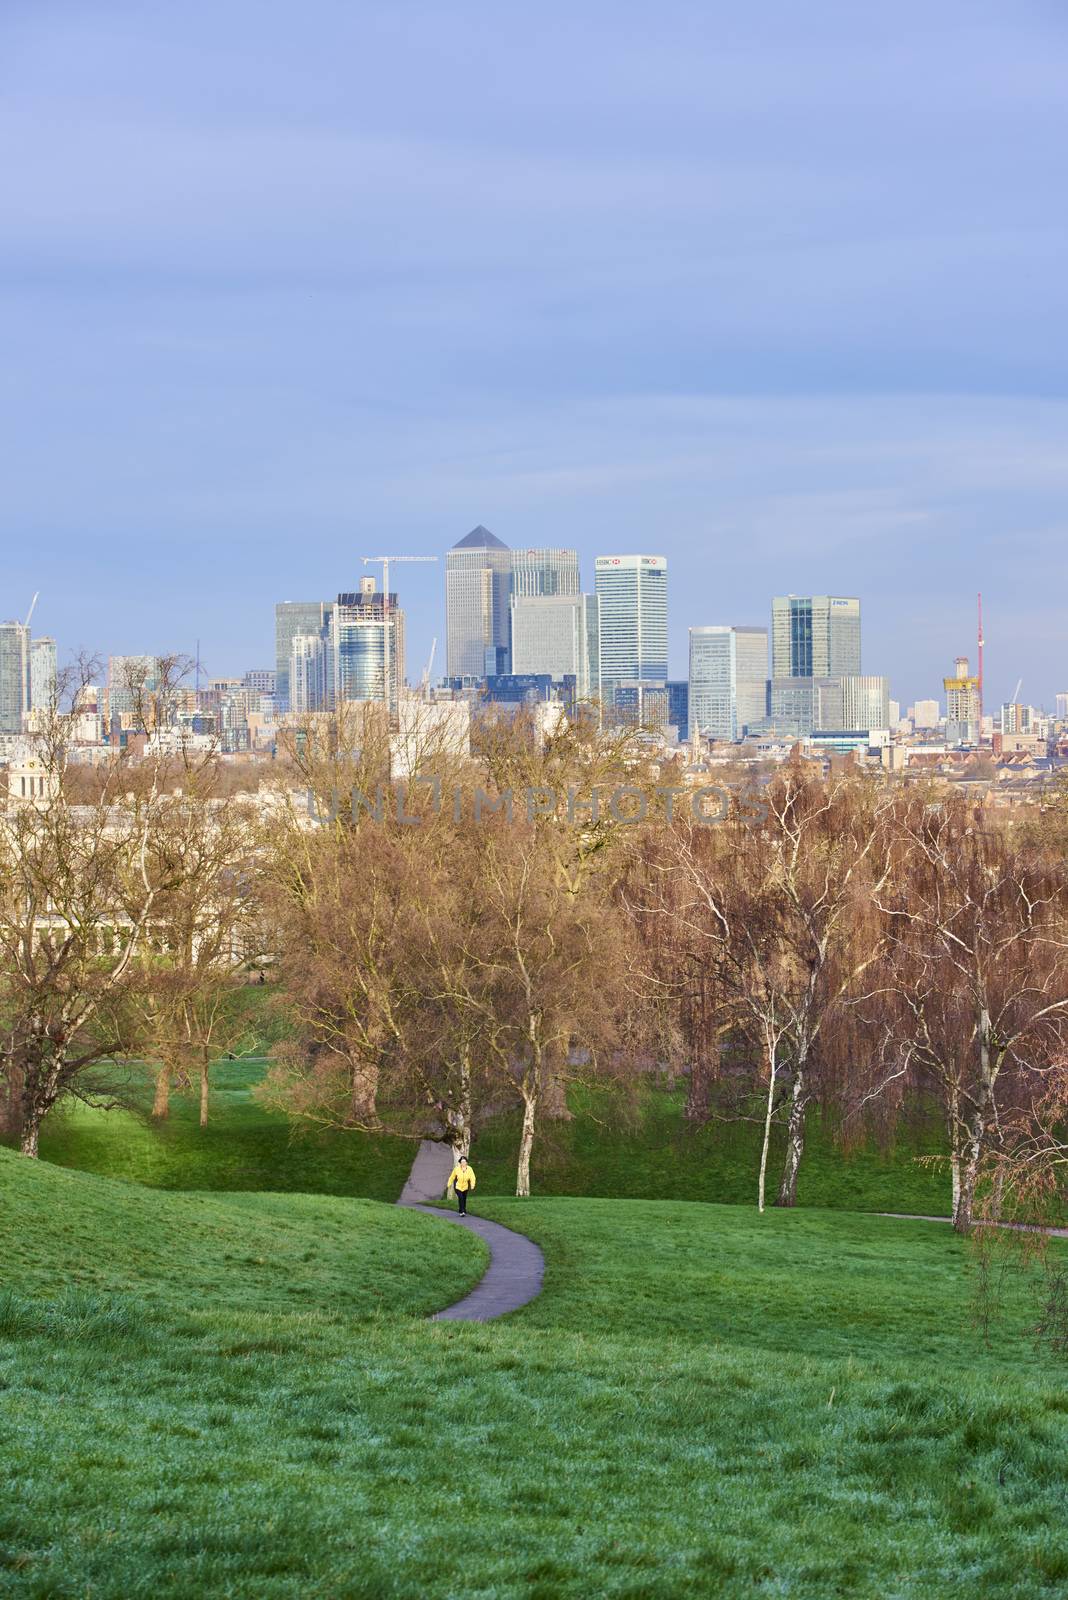 LONDON, UK - DECEMBER 28: Detail of Canary Wharf's bank buildings with autumnal Greenwich Park in the foreground. December 28, 2015 in London.